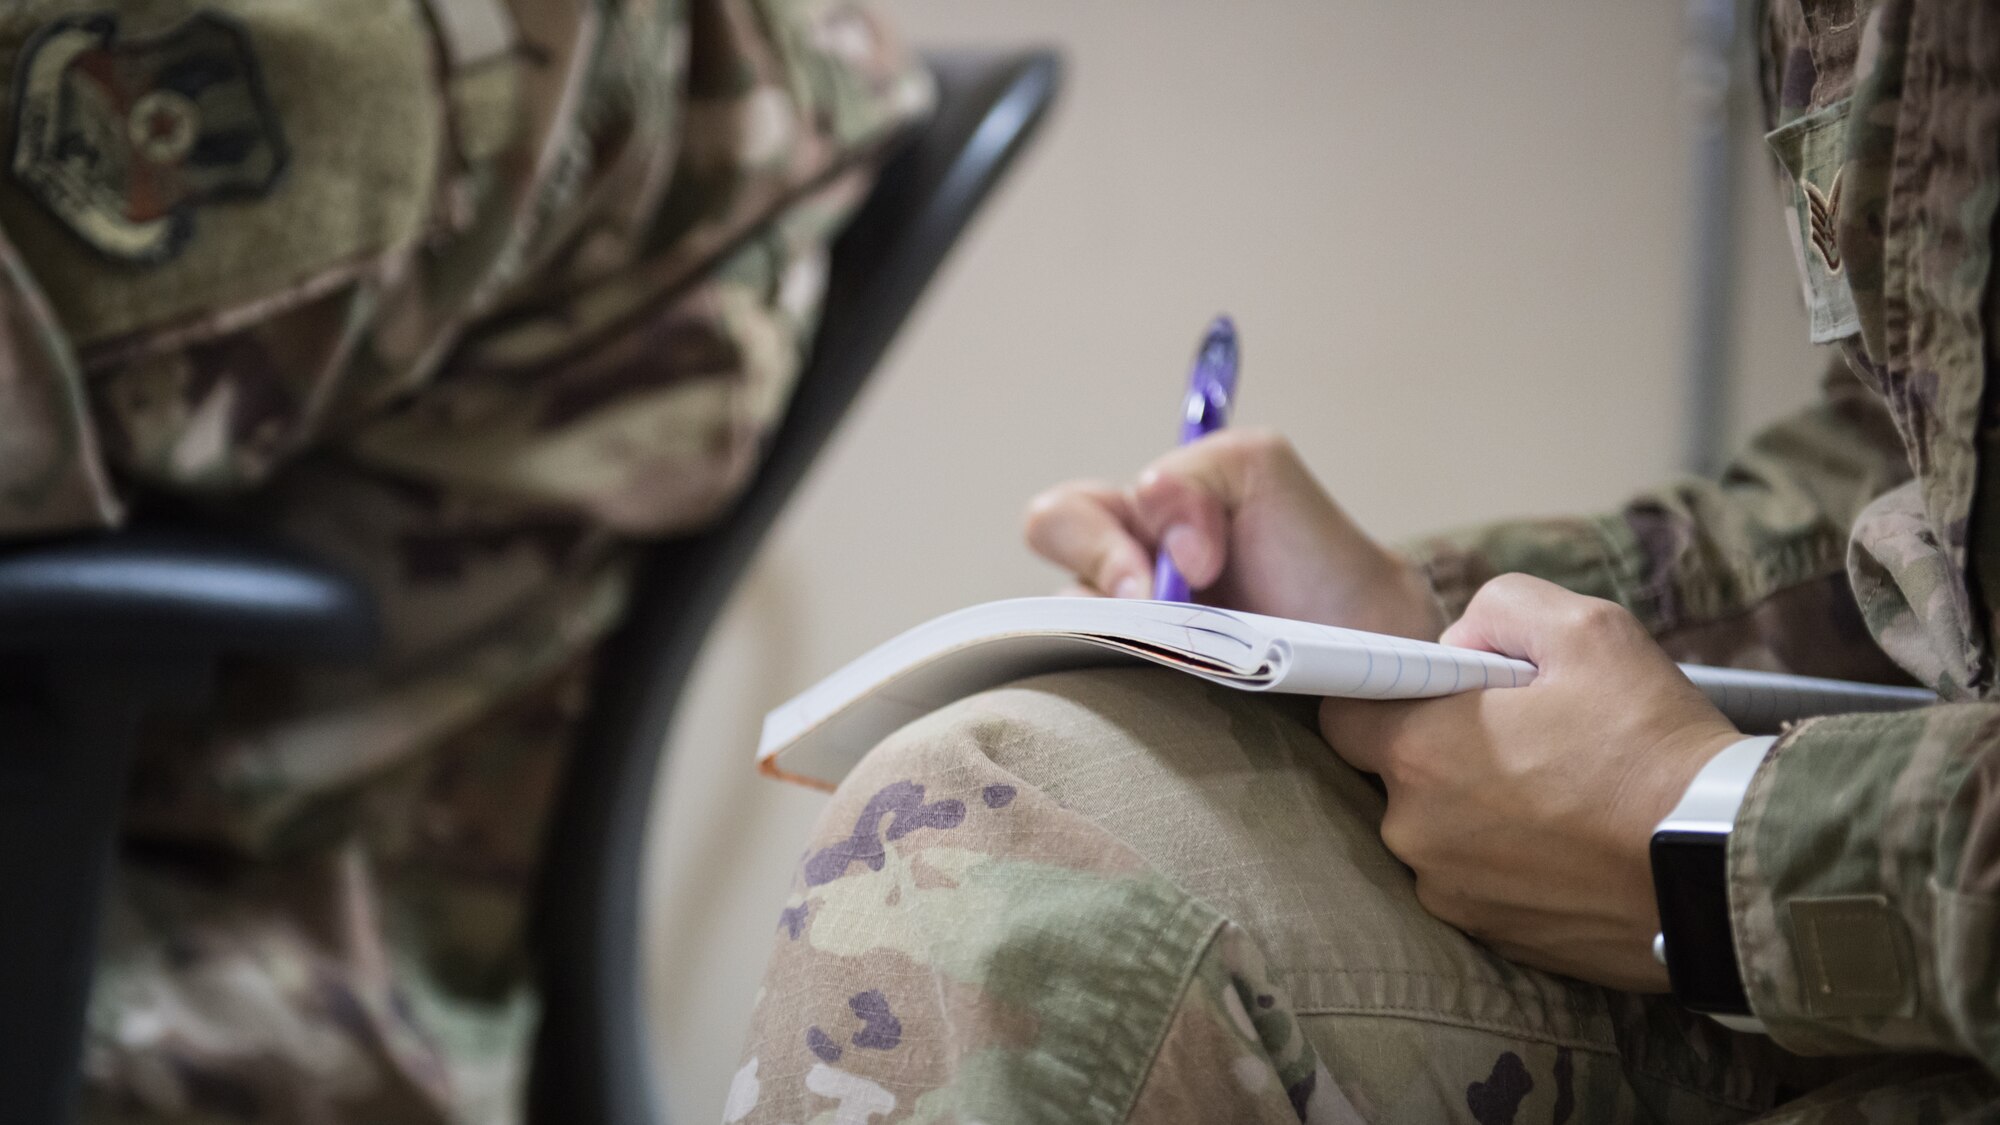 U.S. Air Force Staff Sgt. Courtney Muhl, 386th Air Expeditionary Wing occupational safety NCO-in-charge, jots down notes during a records inspection of the 386th Expeditionary Medical Group's safety programs at Ali Al Salem Air Base, Kuwait, Nov. 27, 2019. Muhl conducted an annual safety inspection of the clinic ensuring it complied with safety requirements, standards and programs. (U.S. Air Force photo by Tech. Sgt. Daniel Martinez)